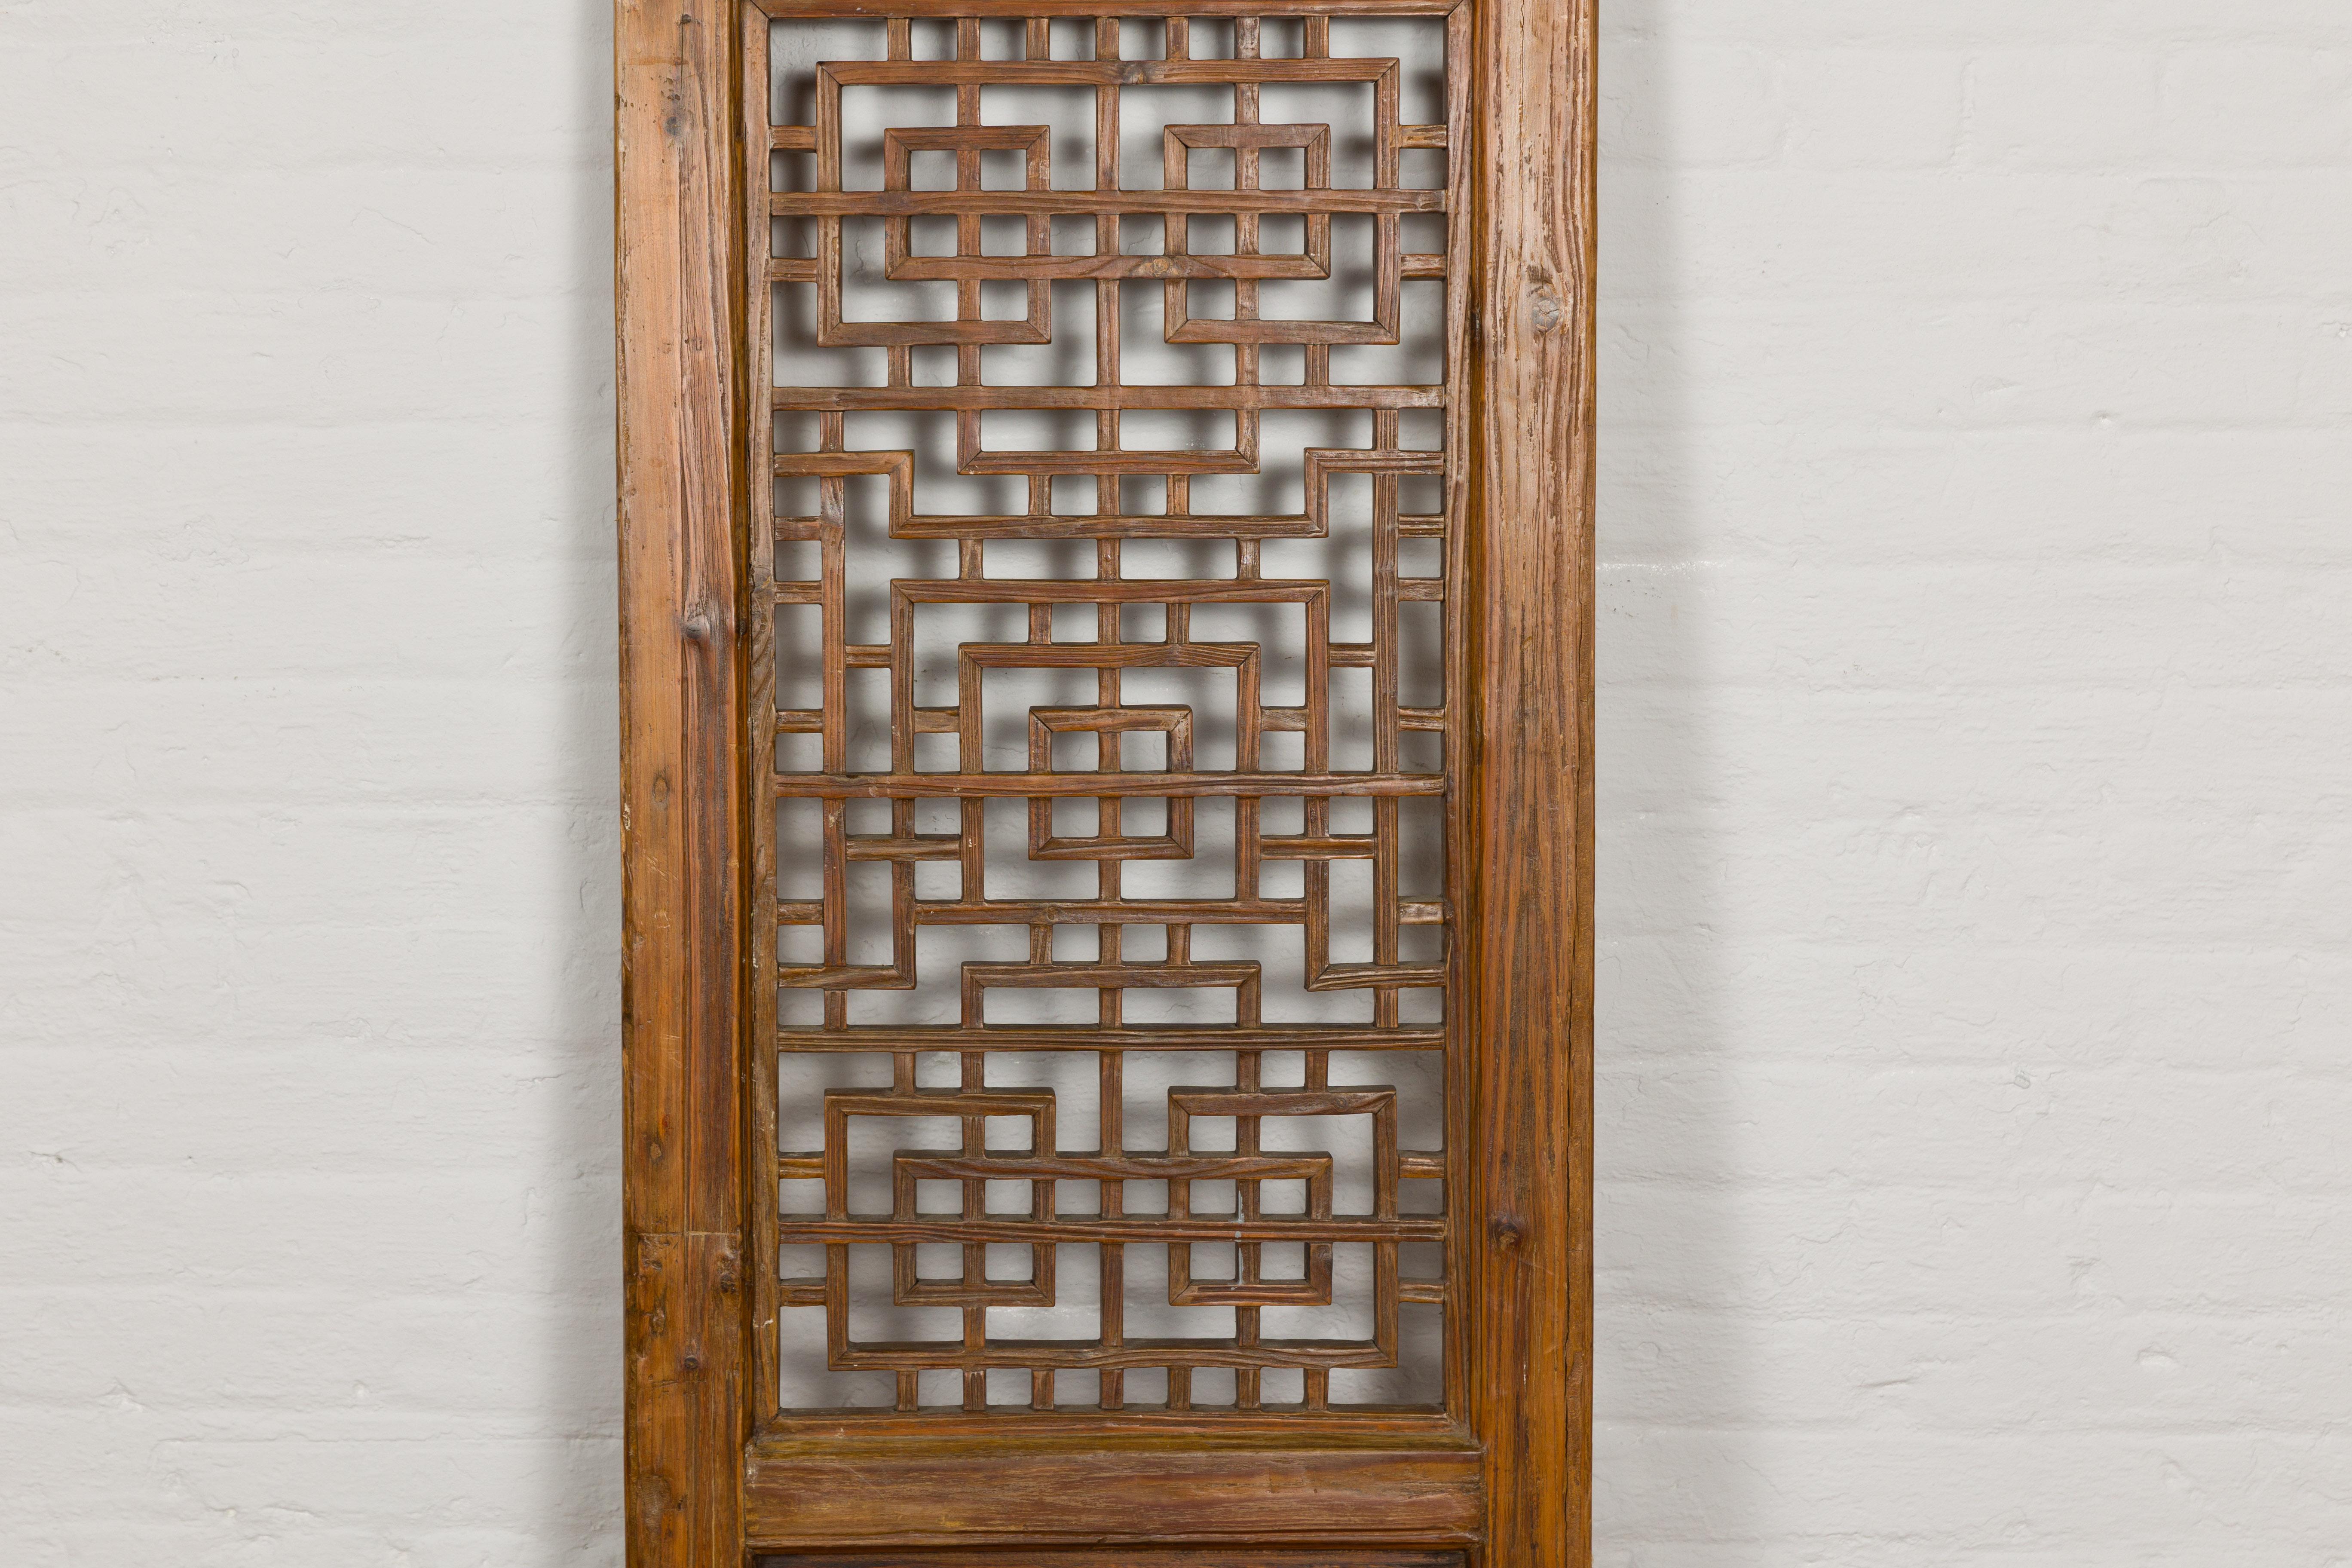 Chinese Qing Dynasty 19th Century Fretwork Screen with Carved Scrolling Motifs For Sale 1